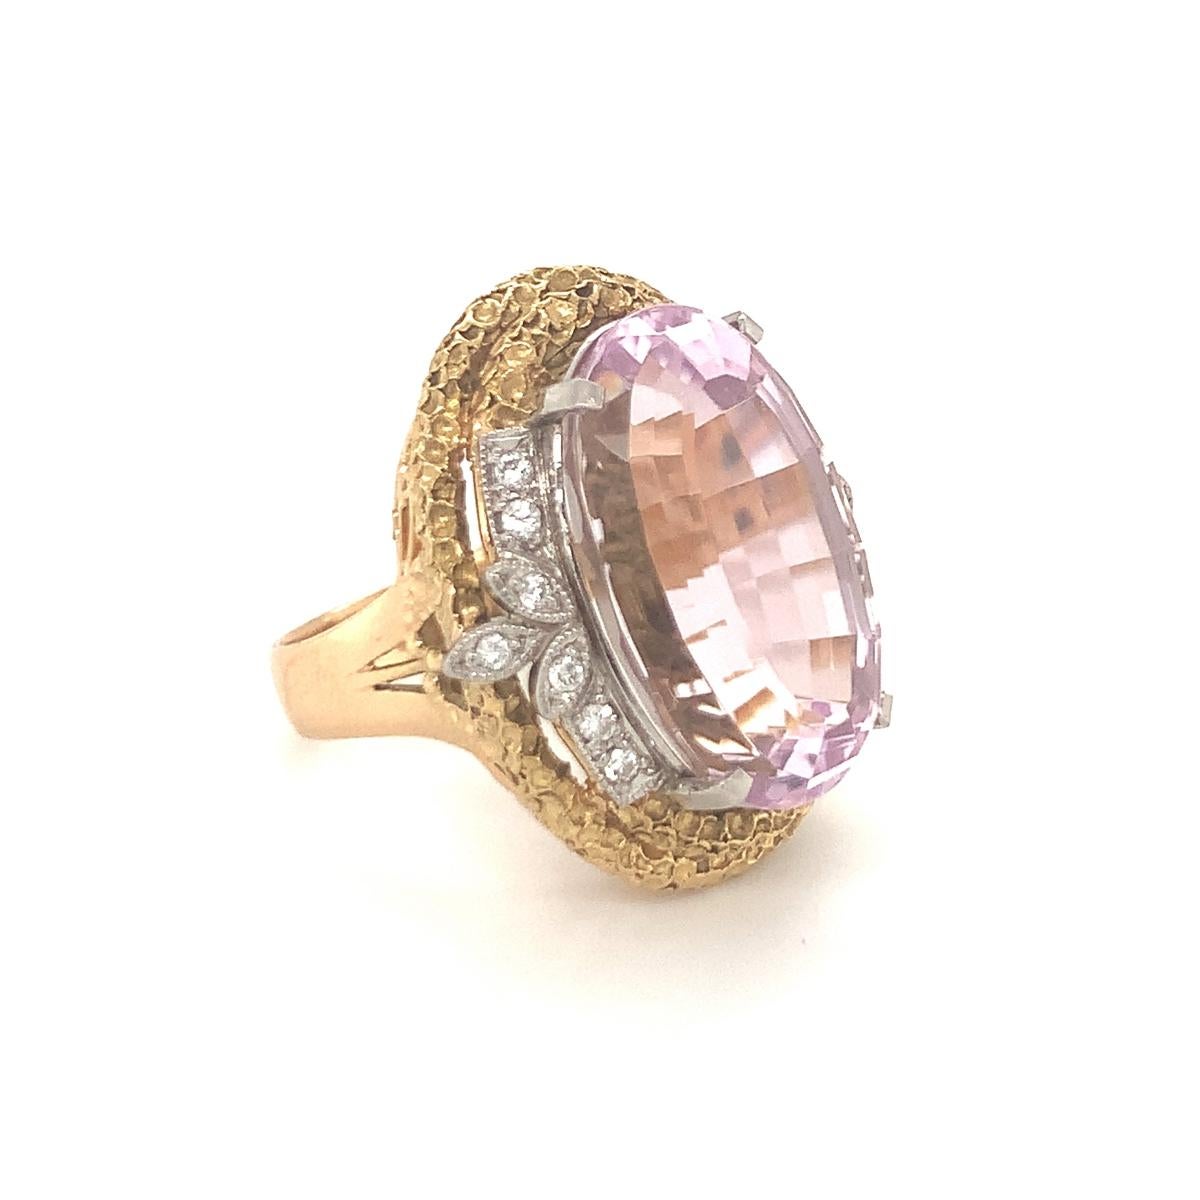 Kunzite and Diamond 18K Yellow Gold and Platinum Ring, circa 1960s For Sale 1